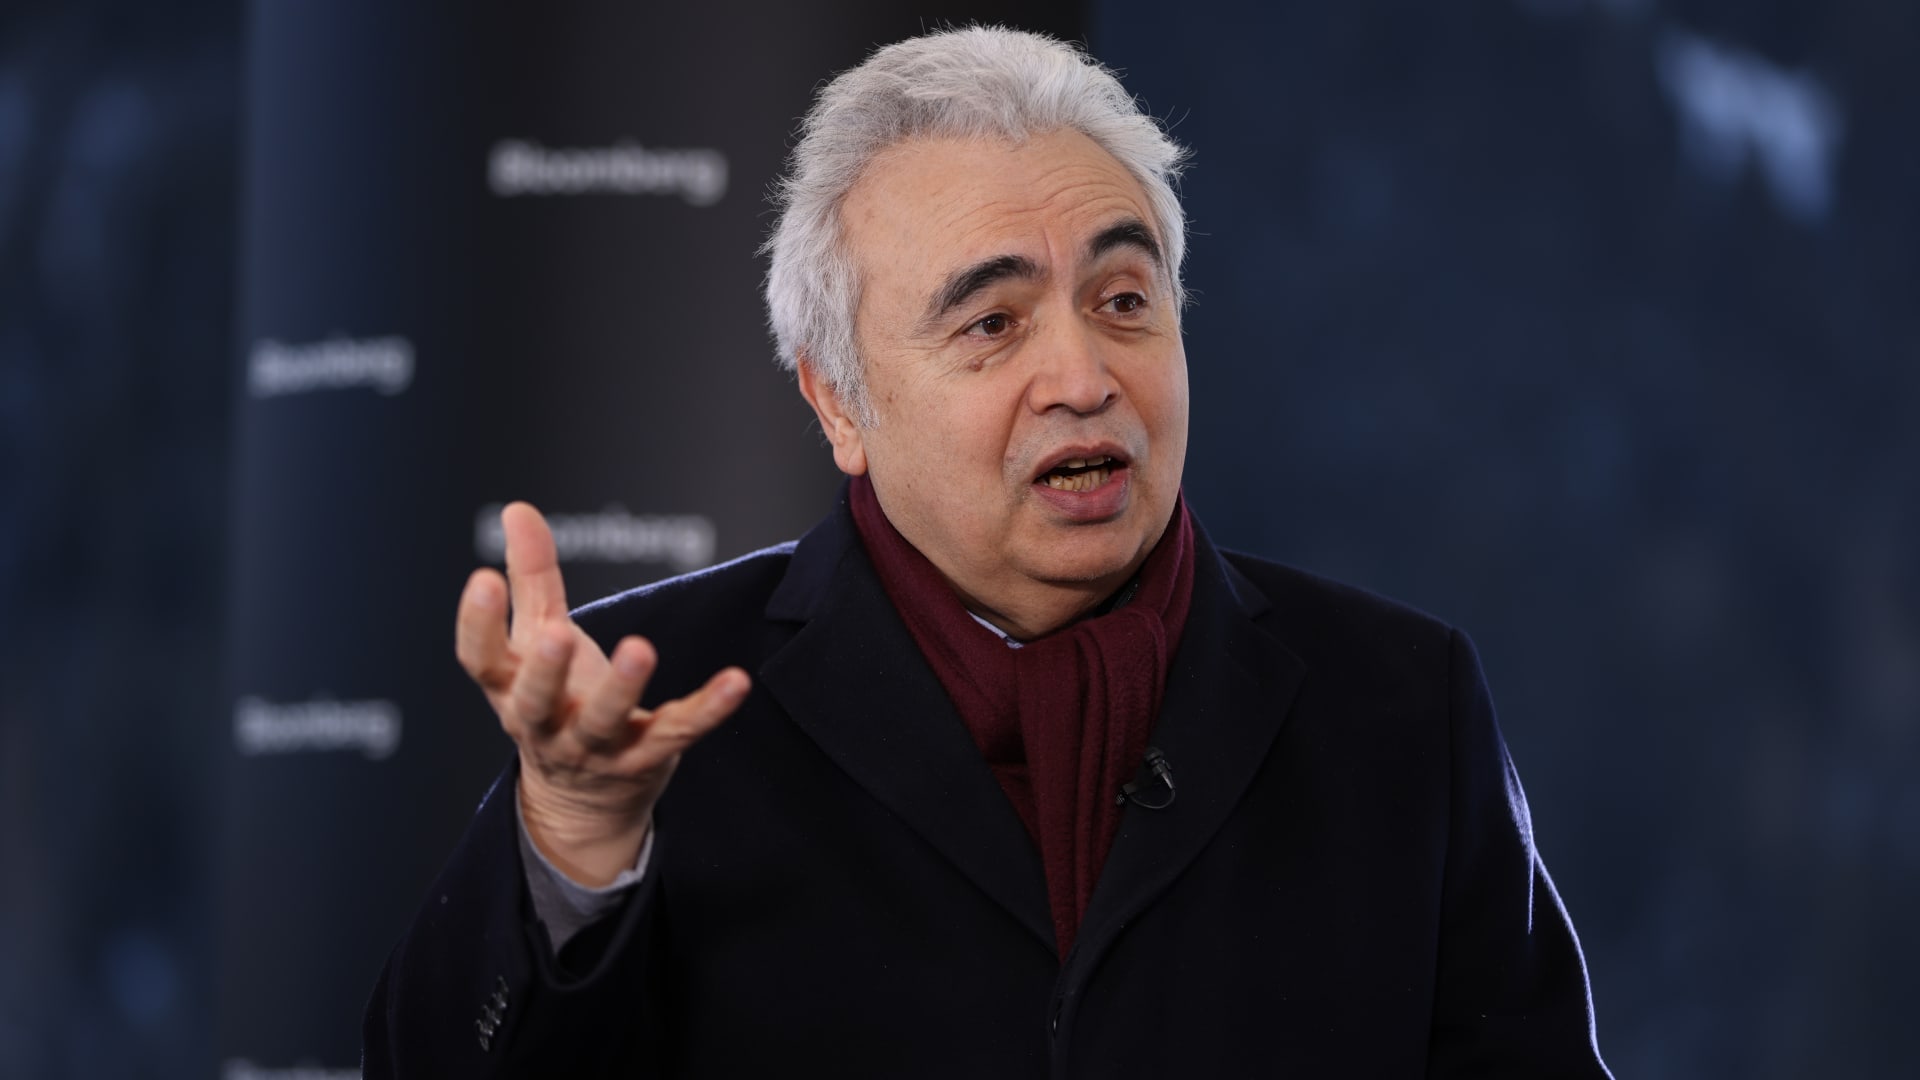 China's rebound is the biggest unknown facing oil markets, IEA chief says